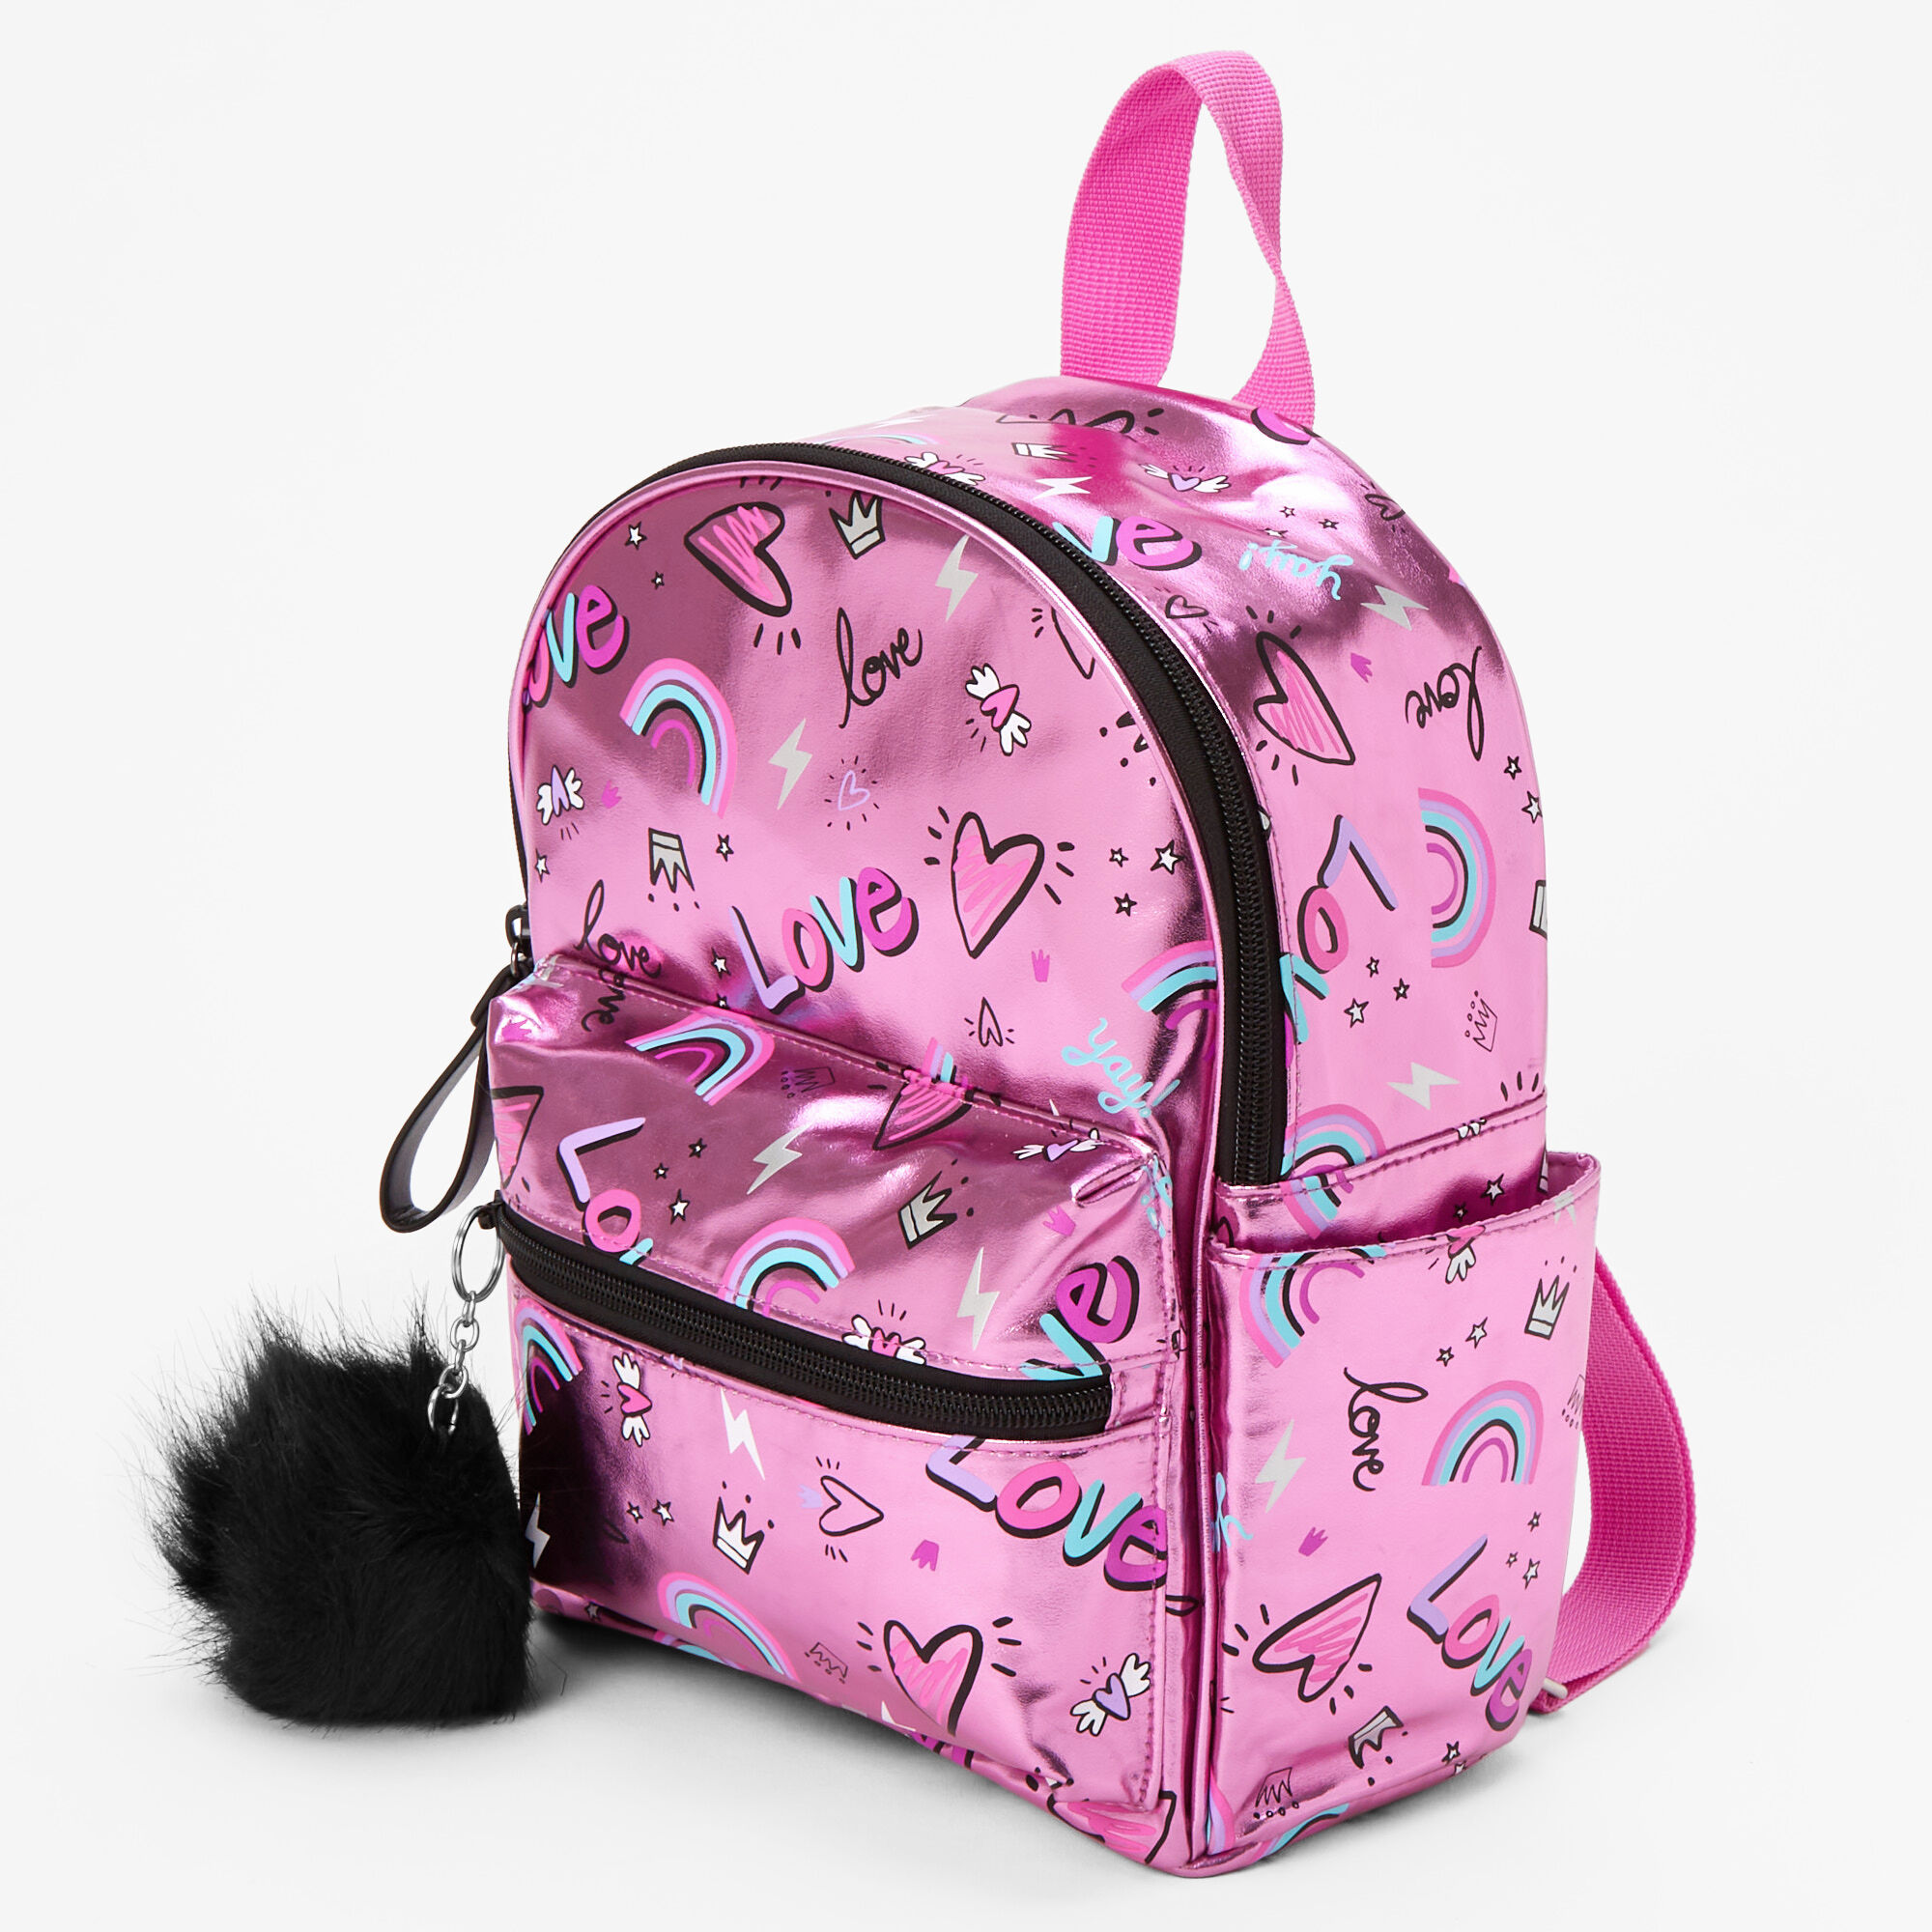 Pink Love Holographic Mini Backpack